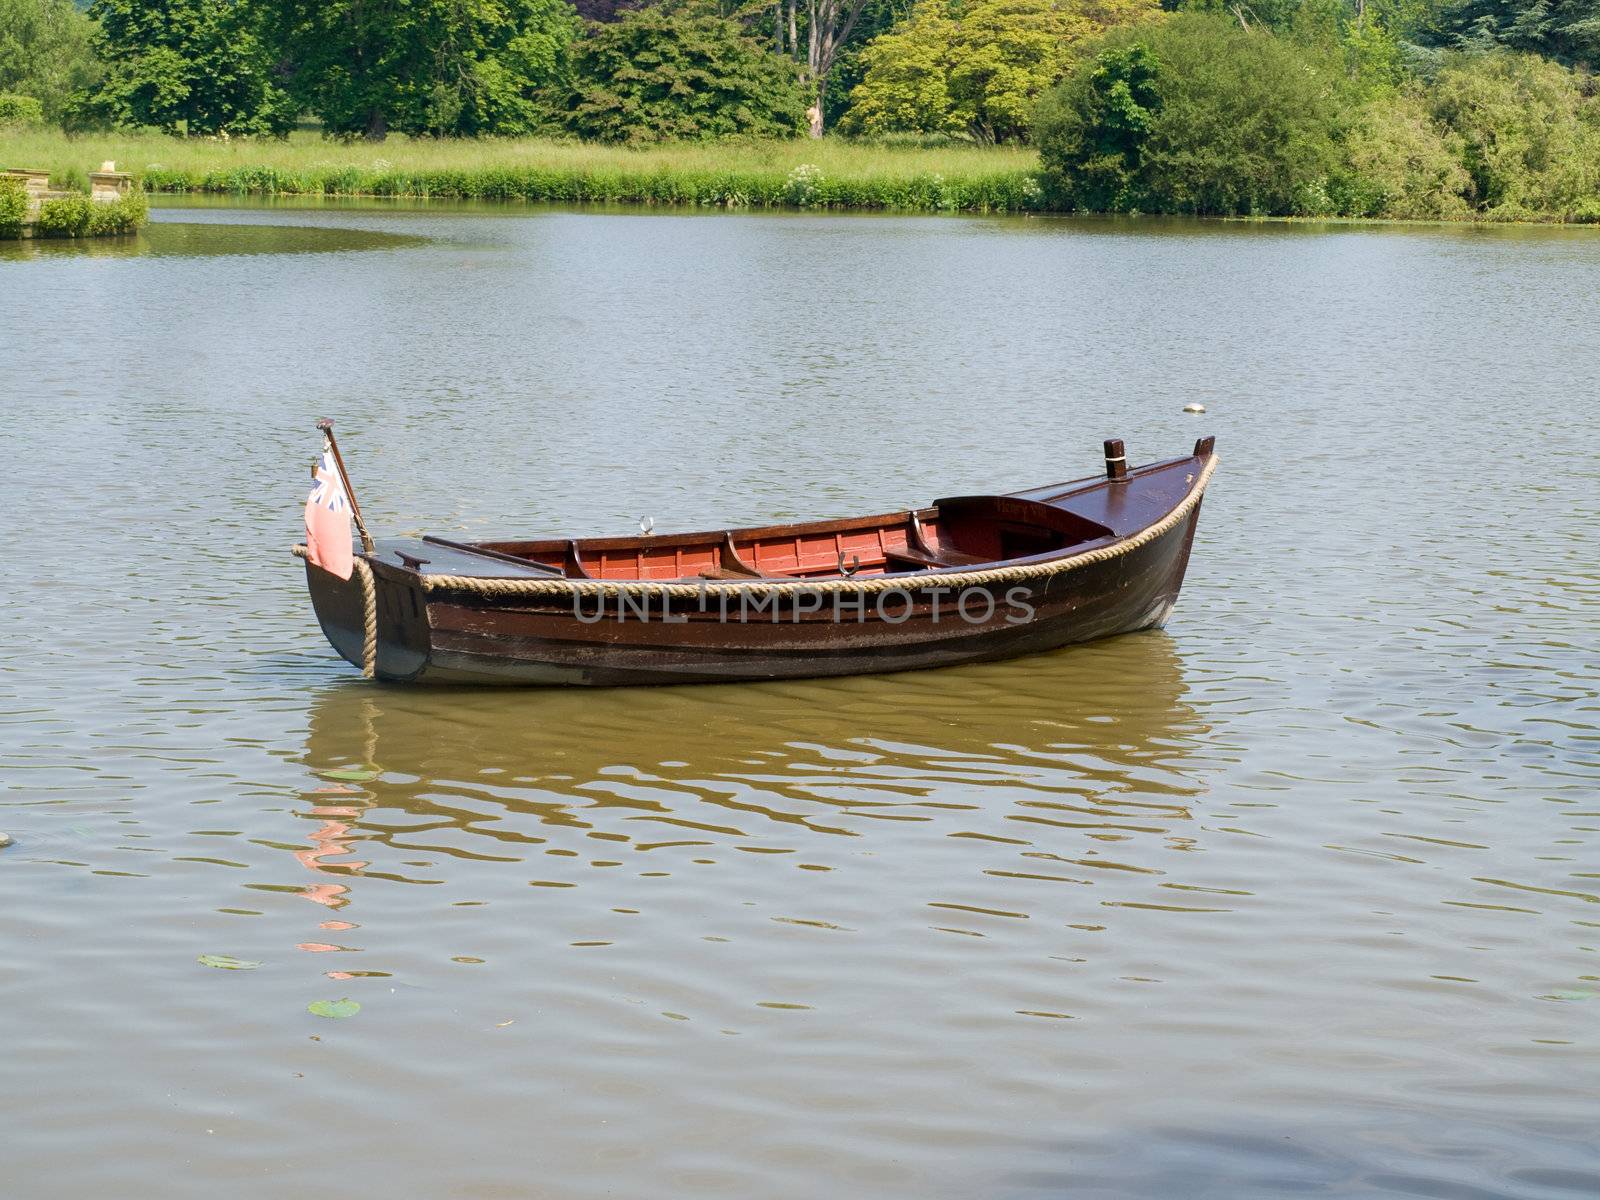 A rowing boat on a lake by timbphotography